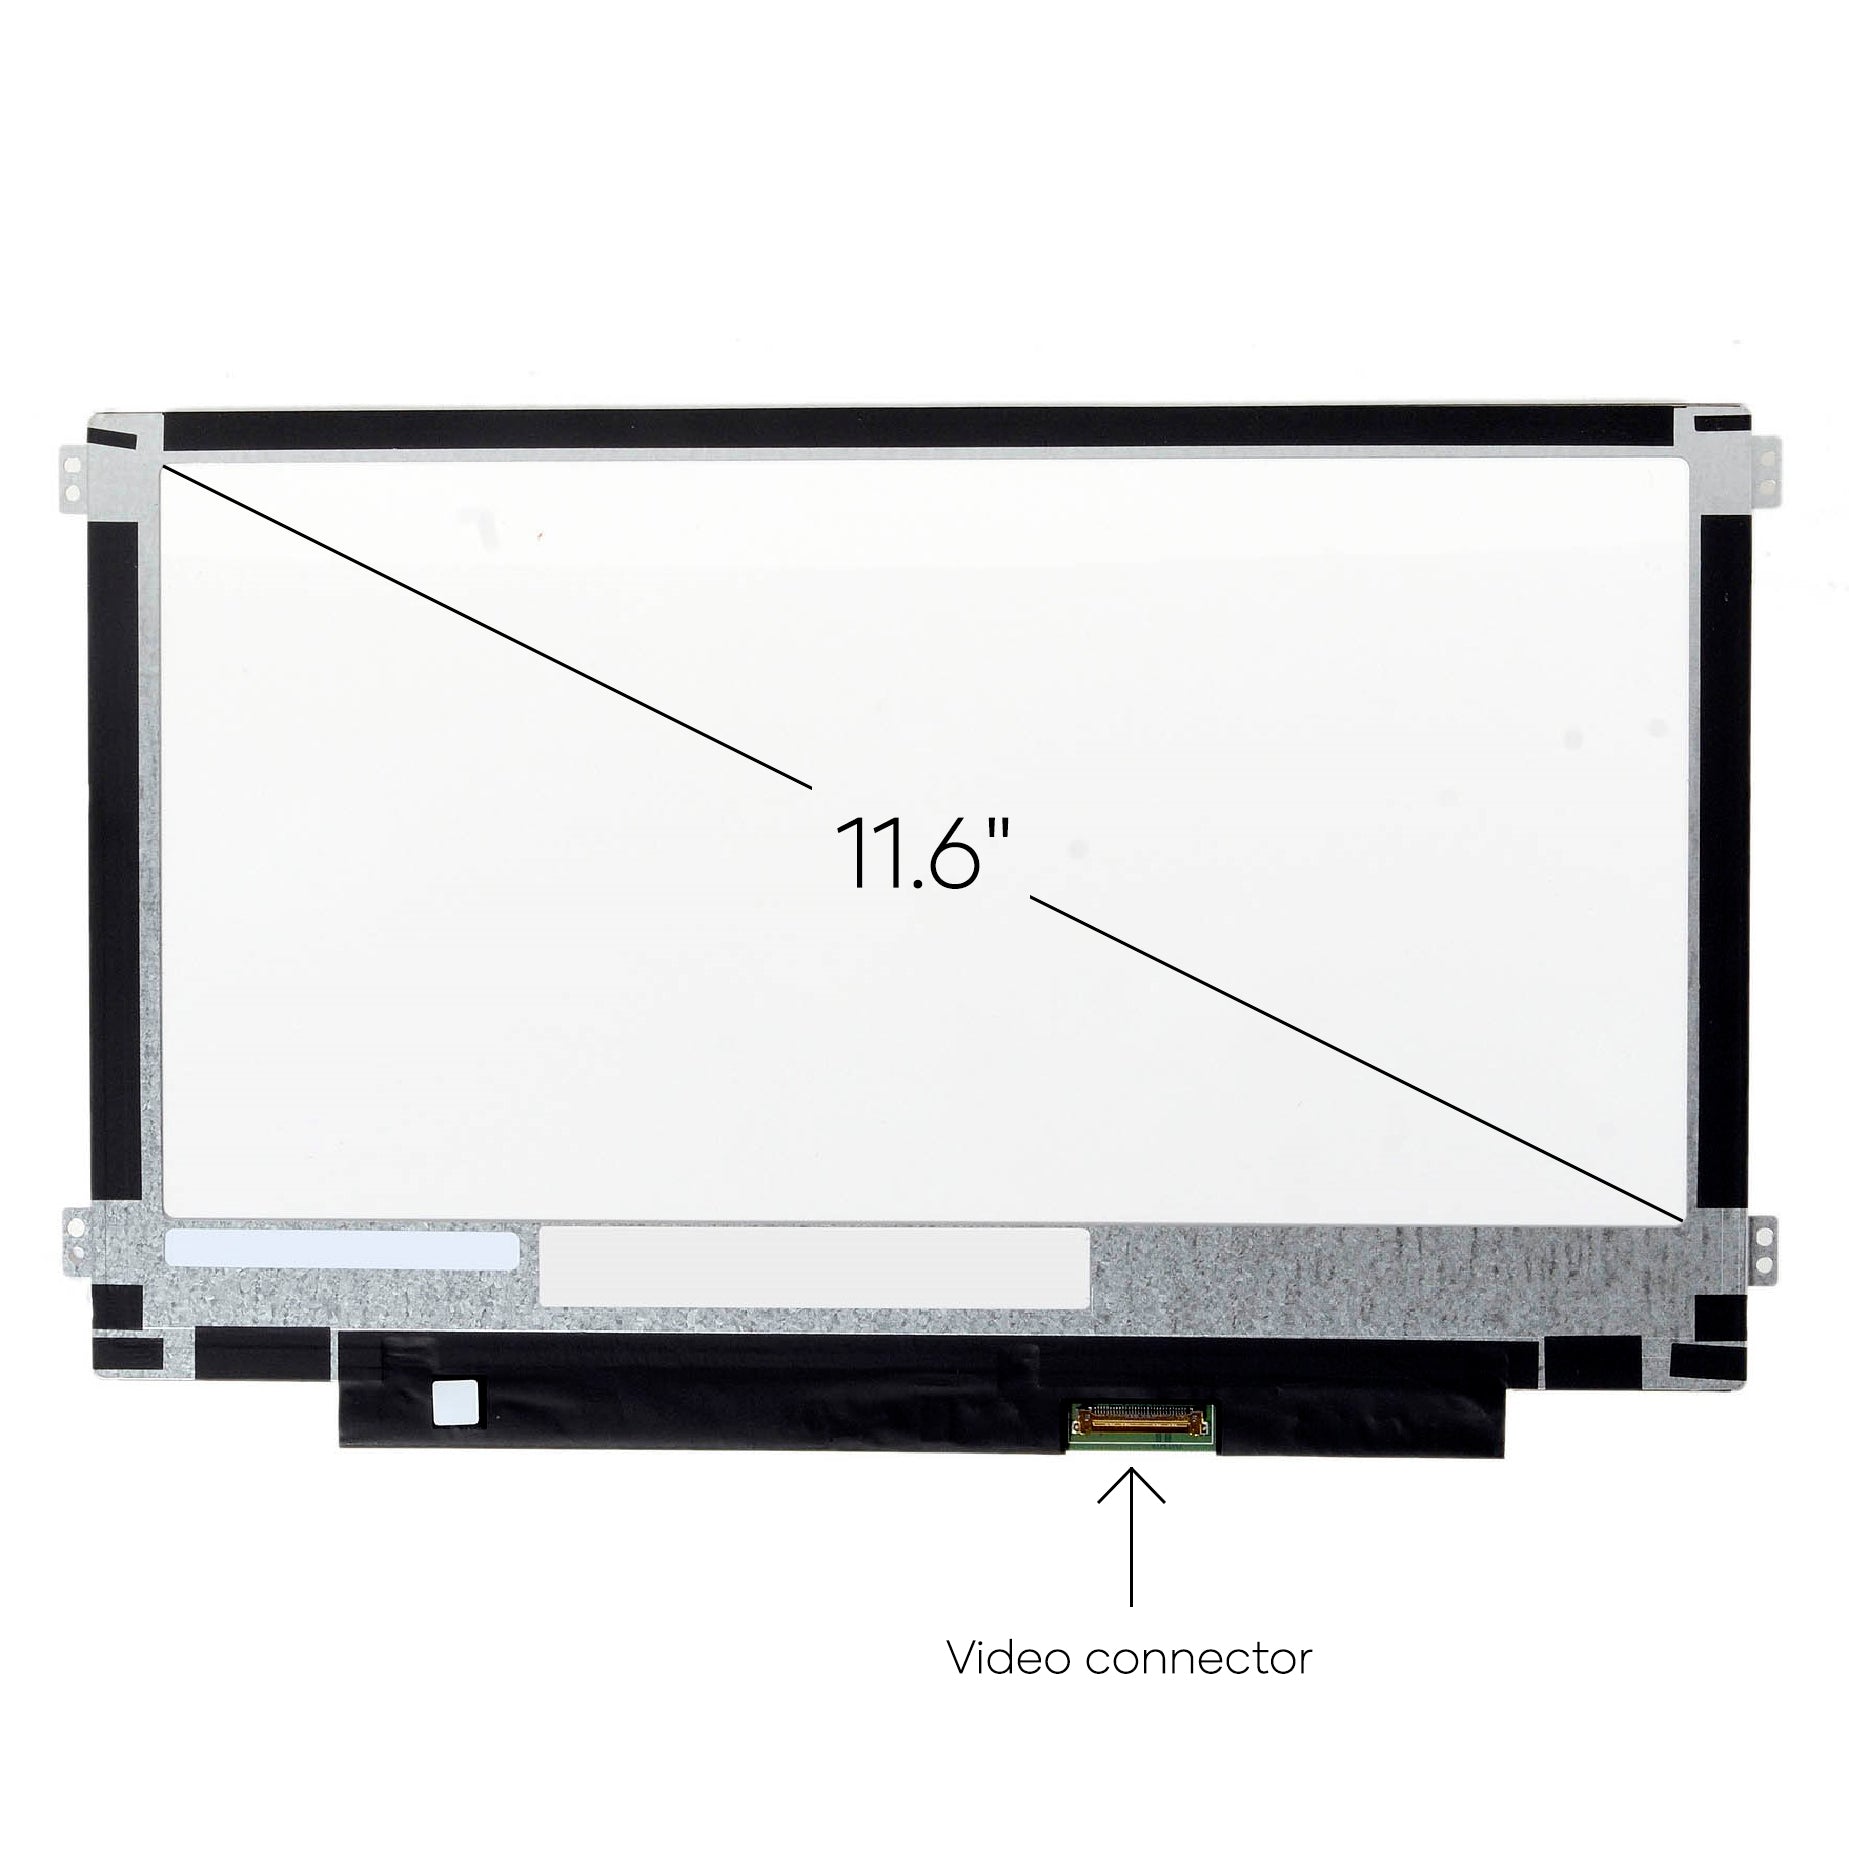 Screen Replacement for Lenovo IdeaPad 100S 80QN0000US HD 1366x768 Matte LCD LED Display